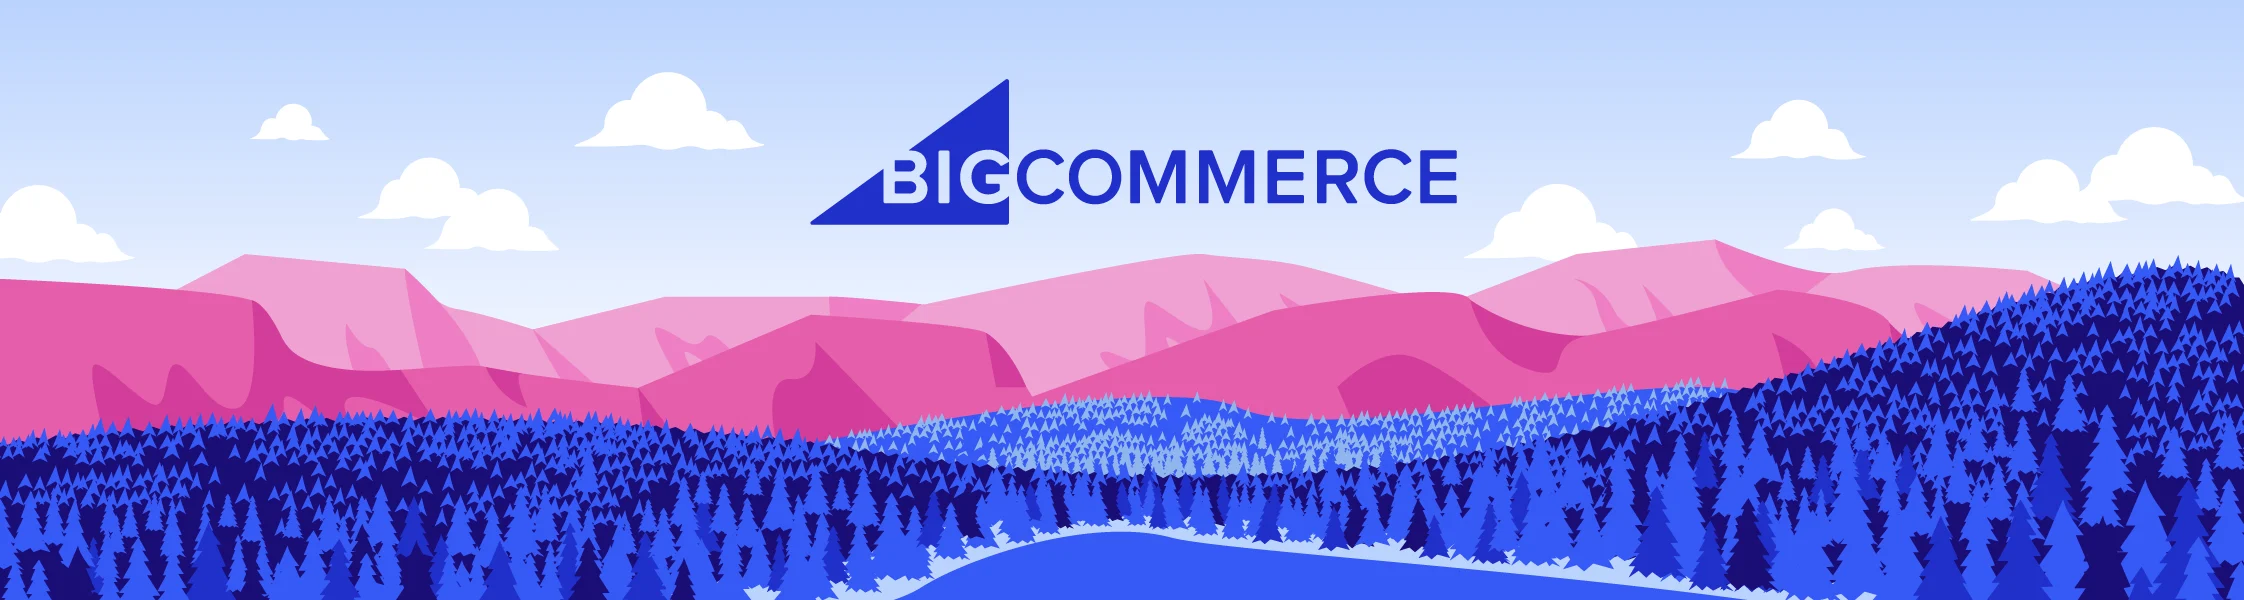 https://cms-wp.bigcommerce.com/wp-content/uploads/2022/08/4619CD_Ecommerce-Outdoor_May-2022_Header.png